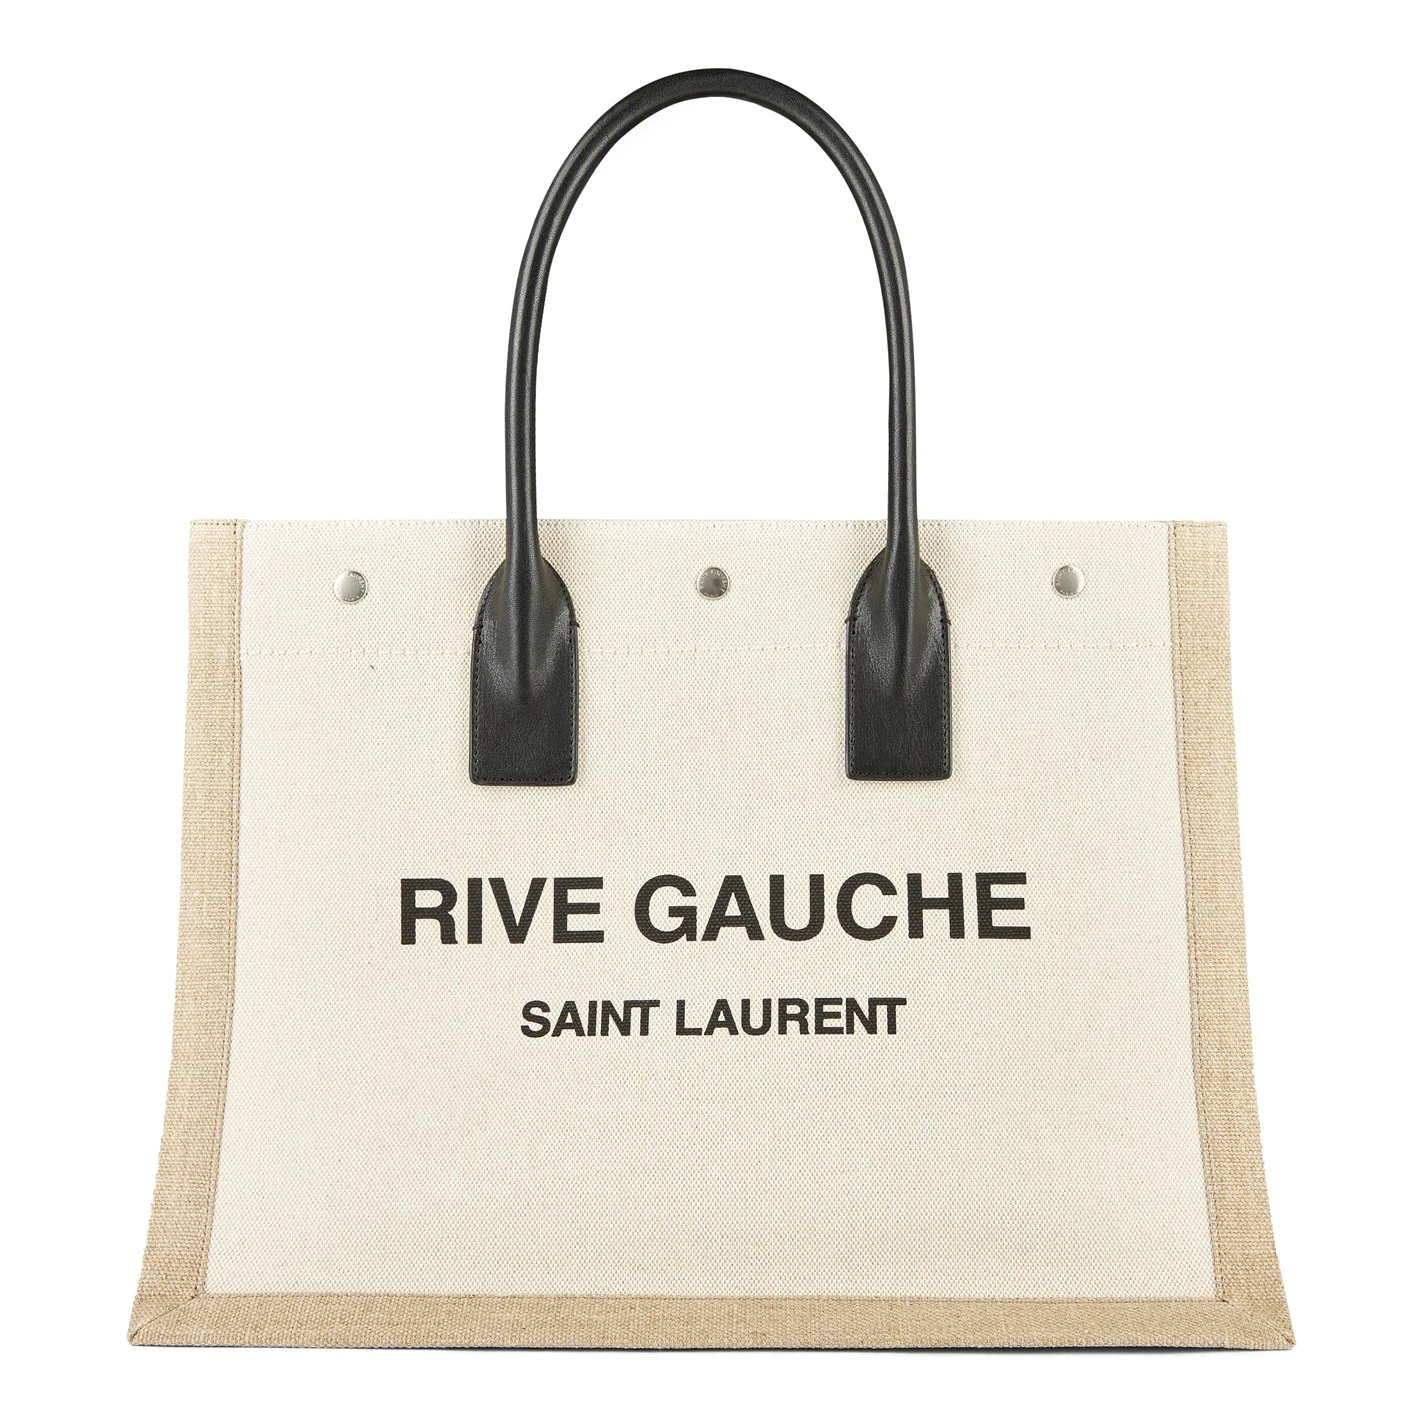 RIVE GAUCHE NORTH/SOUTH TOTE BAG IN SMOOTH LEATHER, Saint Laurent